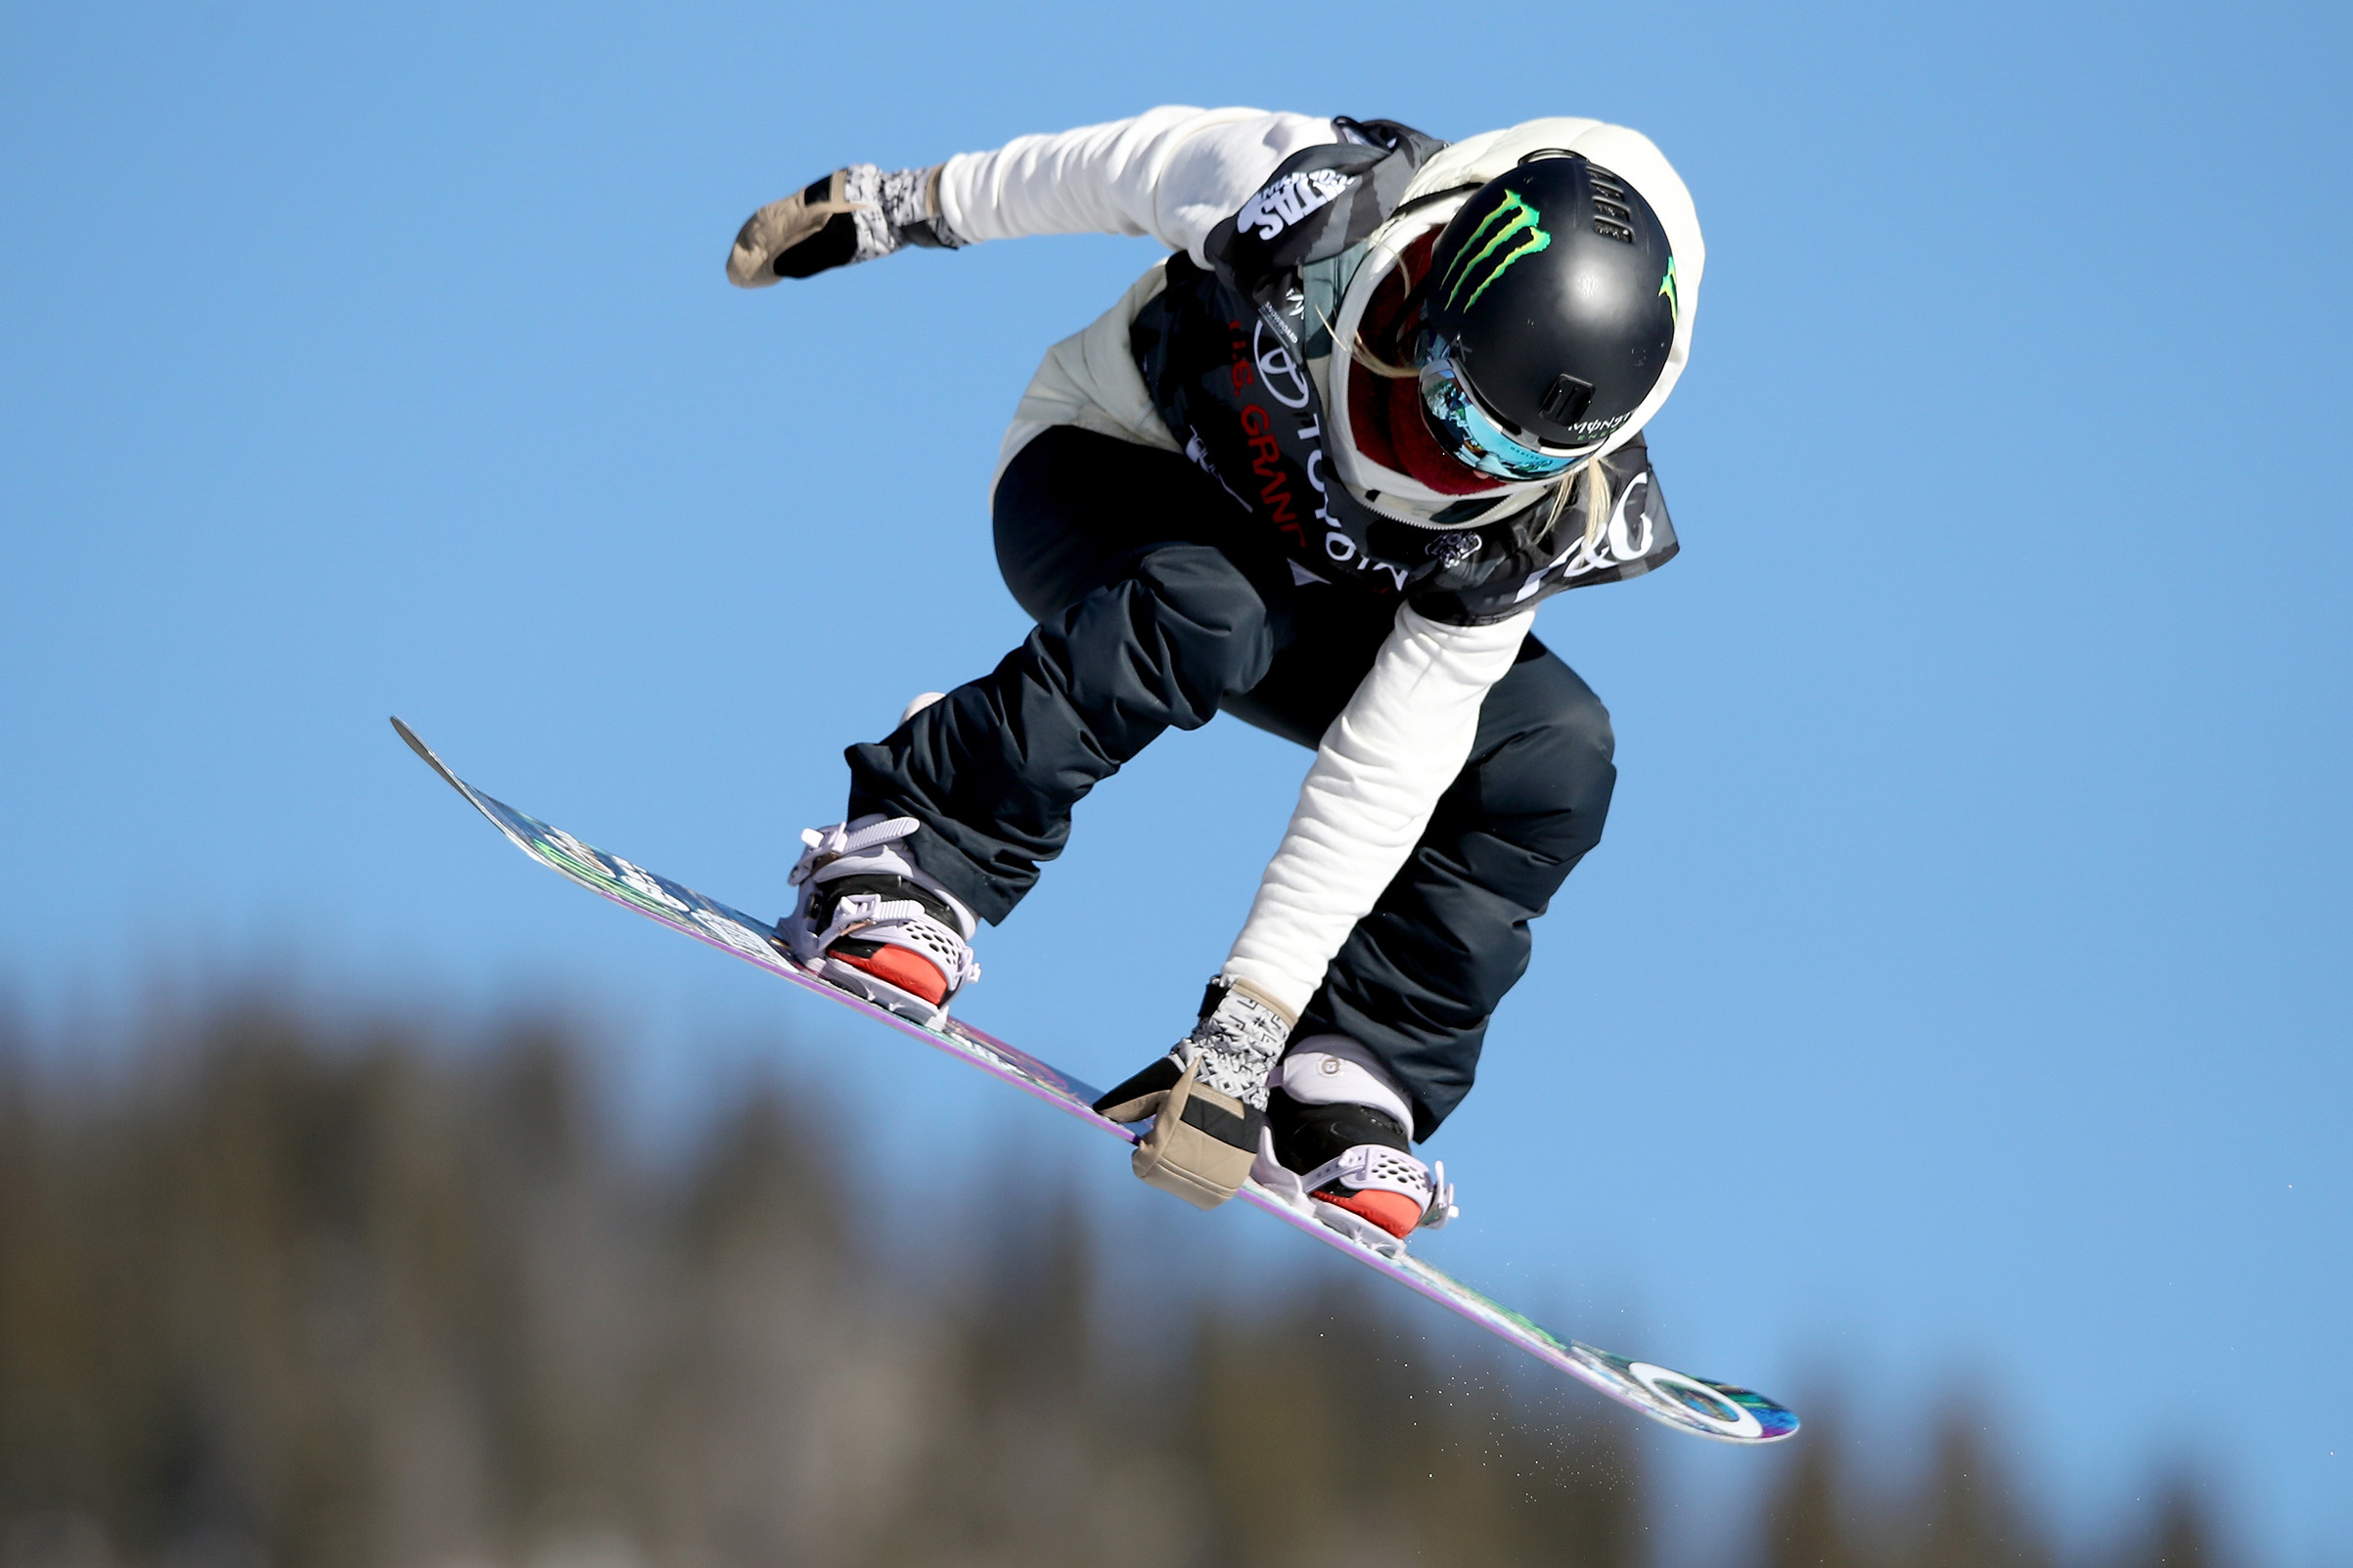 Jamie Anderson of the United States trains for the FIS World Cup 2018 Ladies Snowboard Big Air final in Copper Mountain, Colo., on Dec. 10, 2017. Matthew Stockman—Getty Images (Matthew Stockman—Getty Images)